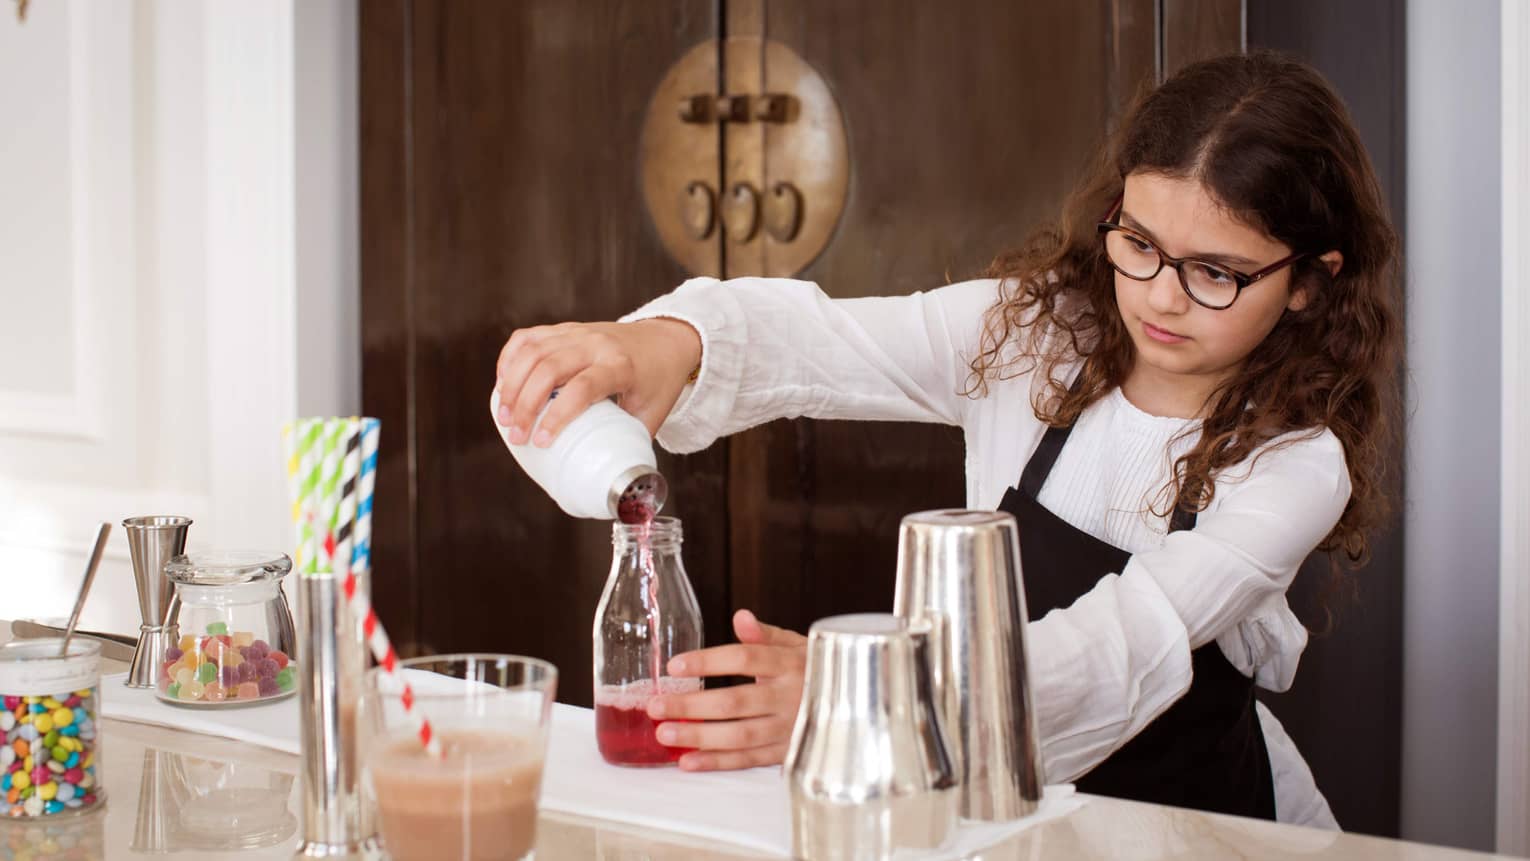 Girl with dark hair and glasses wearing apron, mixing mocktails